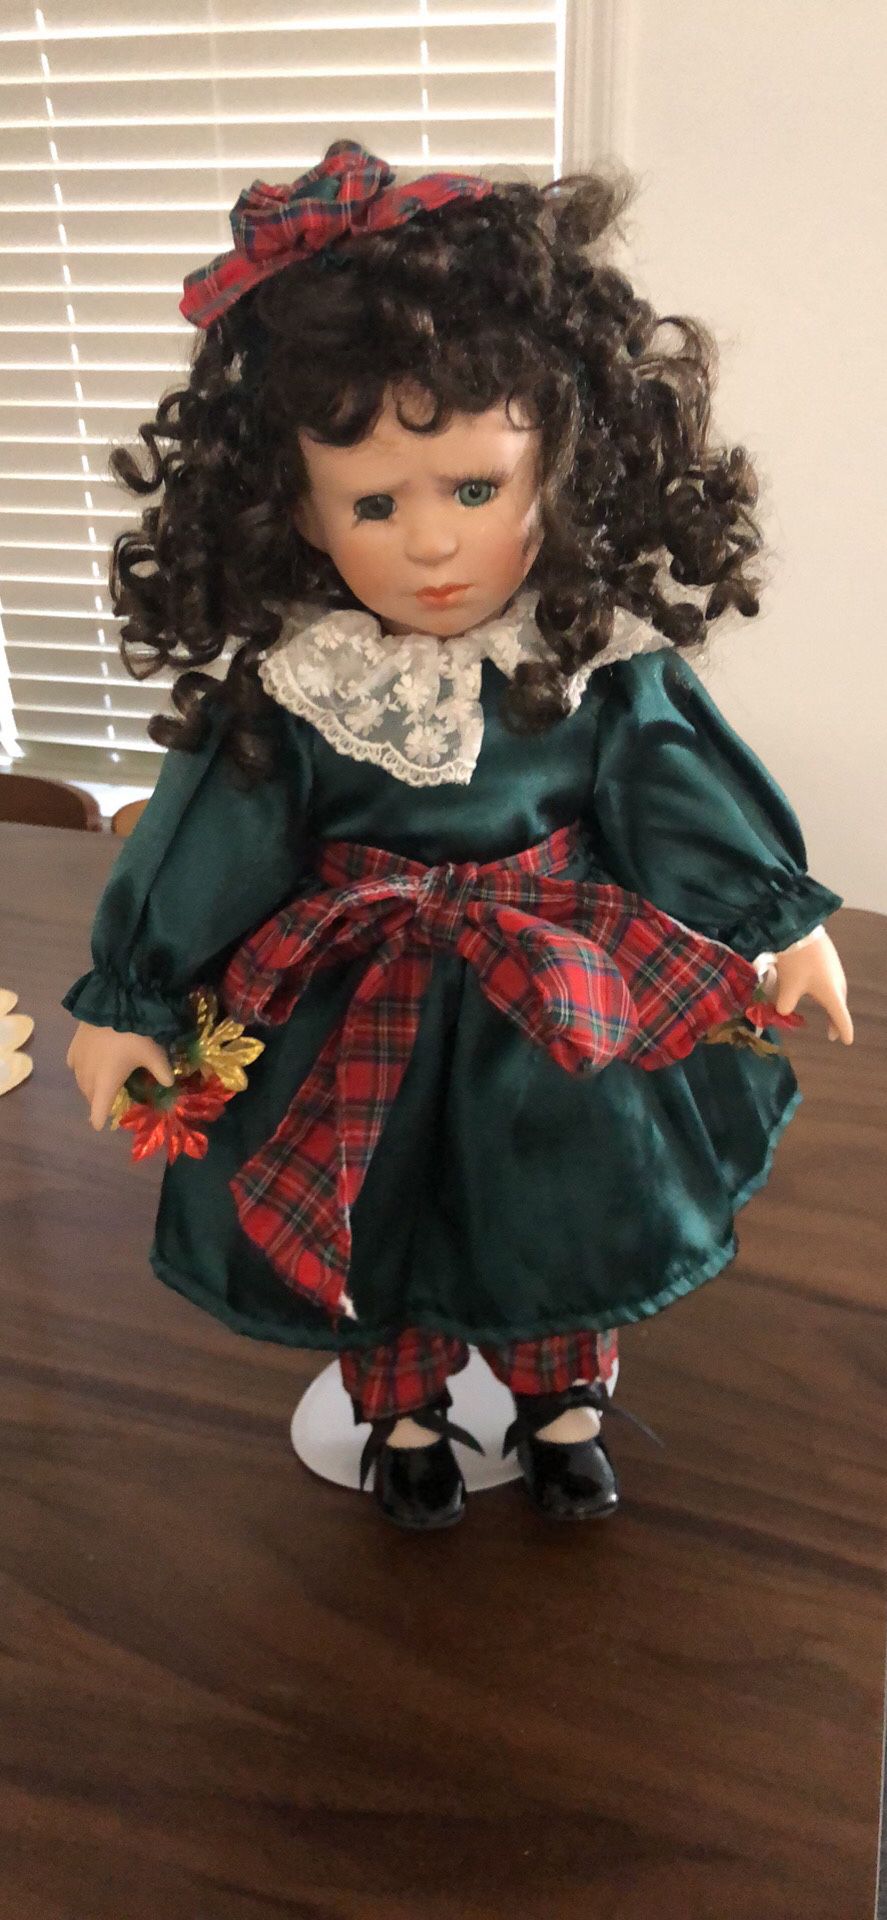 Collectible doll 18” tall